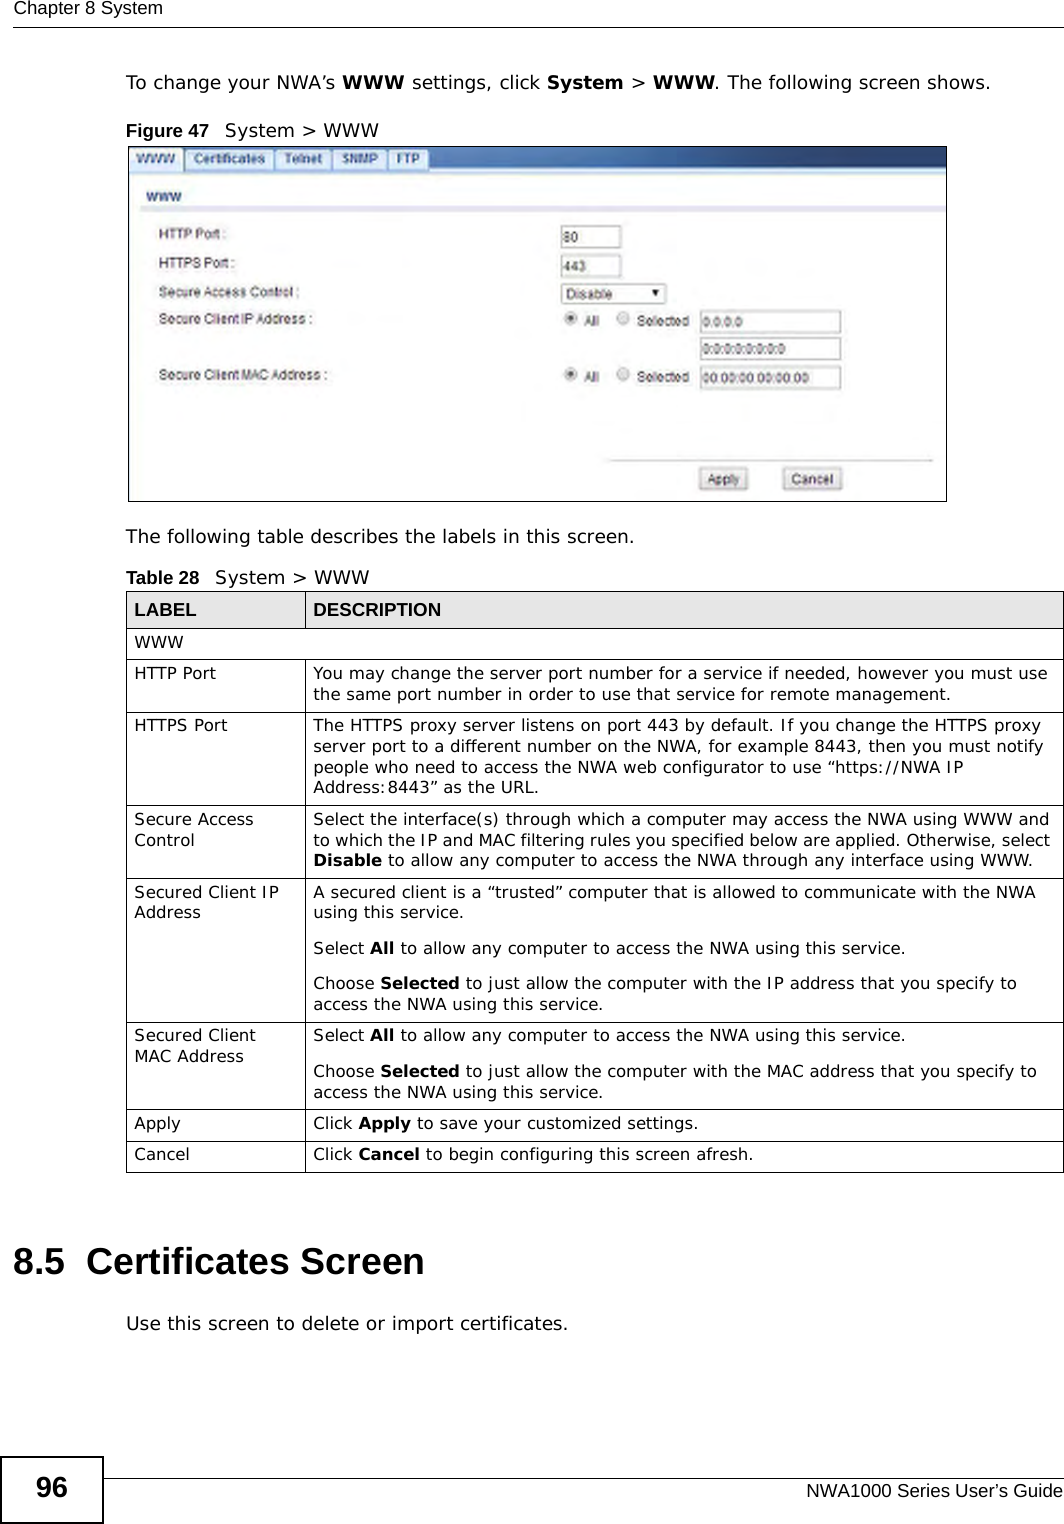 Chapter 8 SystemNWA1000 Series User’s Guide96To change your NWA’s WWW settings, click System &gt; WWW. The following screen shows.Figure 47   System &gt; WWWThe following table describes the labels in this screen.8.5  Certificates ScreenUse this screen to delete or import certificates.Table 28   System &gt; WWWLABEL DESCRIPTIONWWWHTTP Port You may change the server port number for a service if needed, however you must use the same port number in order to use that service for remote management.HTTPS Port The HTTPS proxy server listens on port 443 by default. If you change the HTTPS proxy server port to a different number on the NWA, for example 8443, then you must notify people who need to access the NWA web configurator to use “https://NWA IP Address:8443” as the URL.Secure Access Control Select the interface(s) through which a computer may access the NWA using WWW and to which the IP and MAC filtering rules you specified below are applied. Otherwise, select Disable to allow any computer to access the NWA through any interface using WWW.Secured Client IP Address A secured client is a “trusted” computer that is allowed to communicate with the NWA using this service. Select All to allow any computer to access the NWA using this service.Choose Selected to just allow the computer with the IP address that you specify to access the NWA using this service.Secured Client MAC Address Select All to allow any computer to access the NWA using this service.Choose Selected to just allow the computer with the MAC address that you specify to access the NWA using this service.Apply Click Apply to save your customized settings. Cancel Click Cancel to begin configuring this screen afresh.